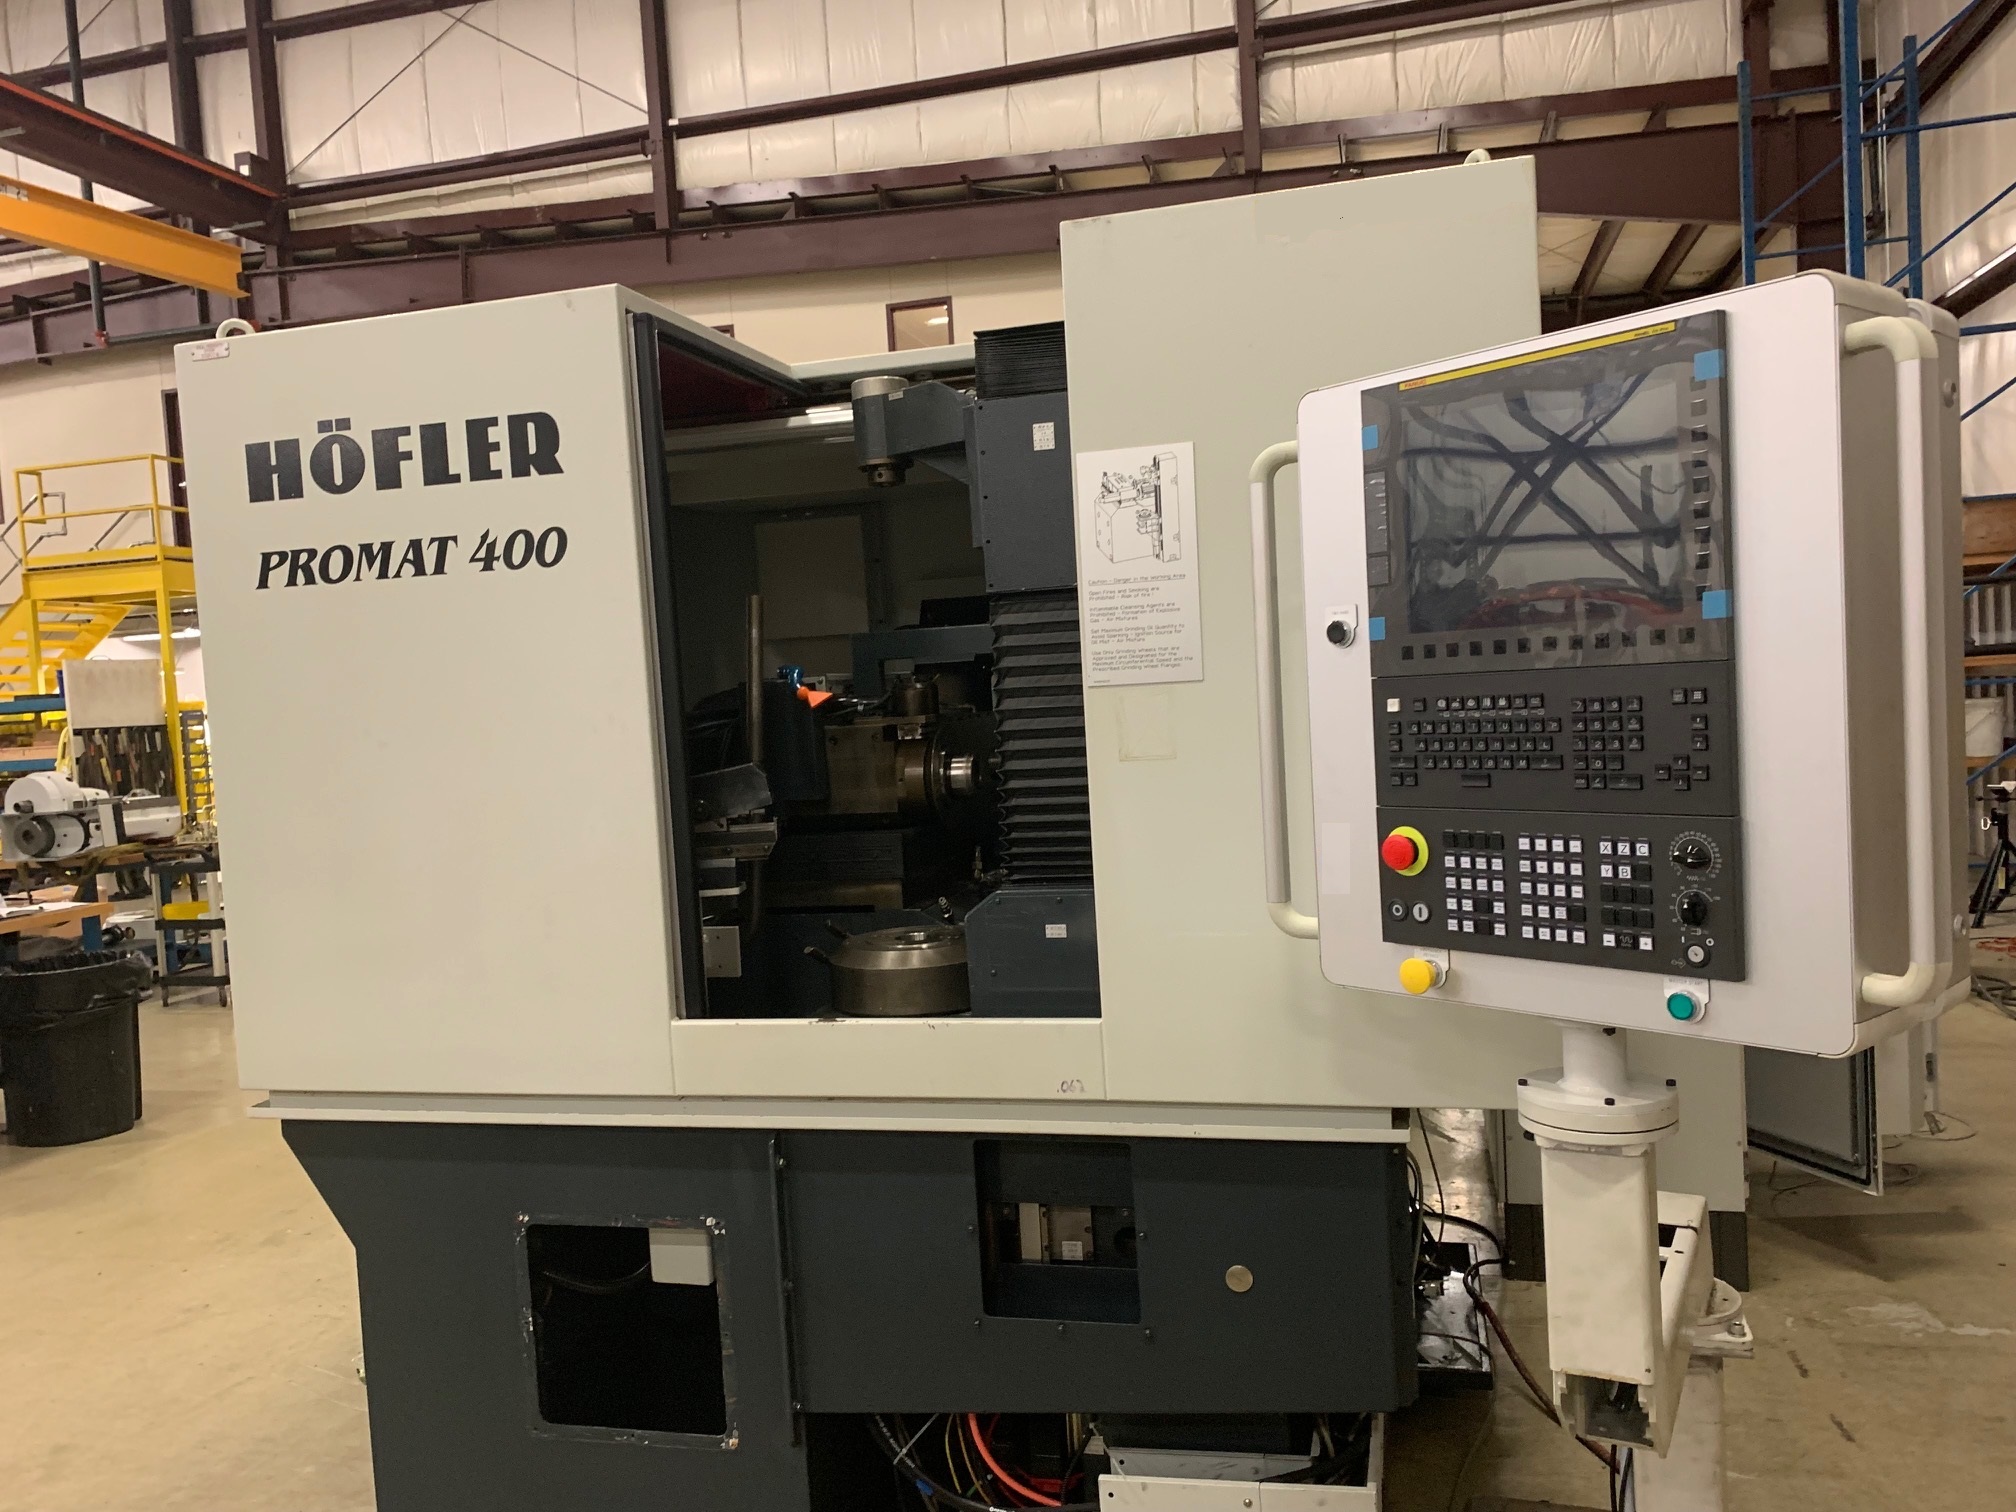  MTB completes 3 Hofler Promat 400 Gear Grinder CNC Upgrades for our Country’s Military Industrial Complex